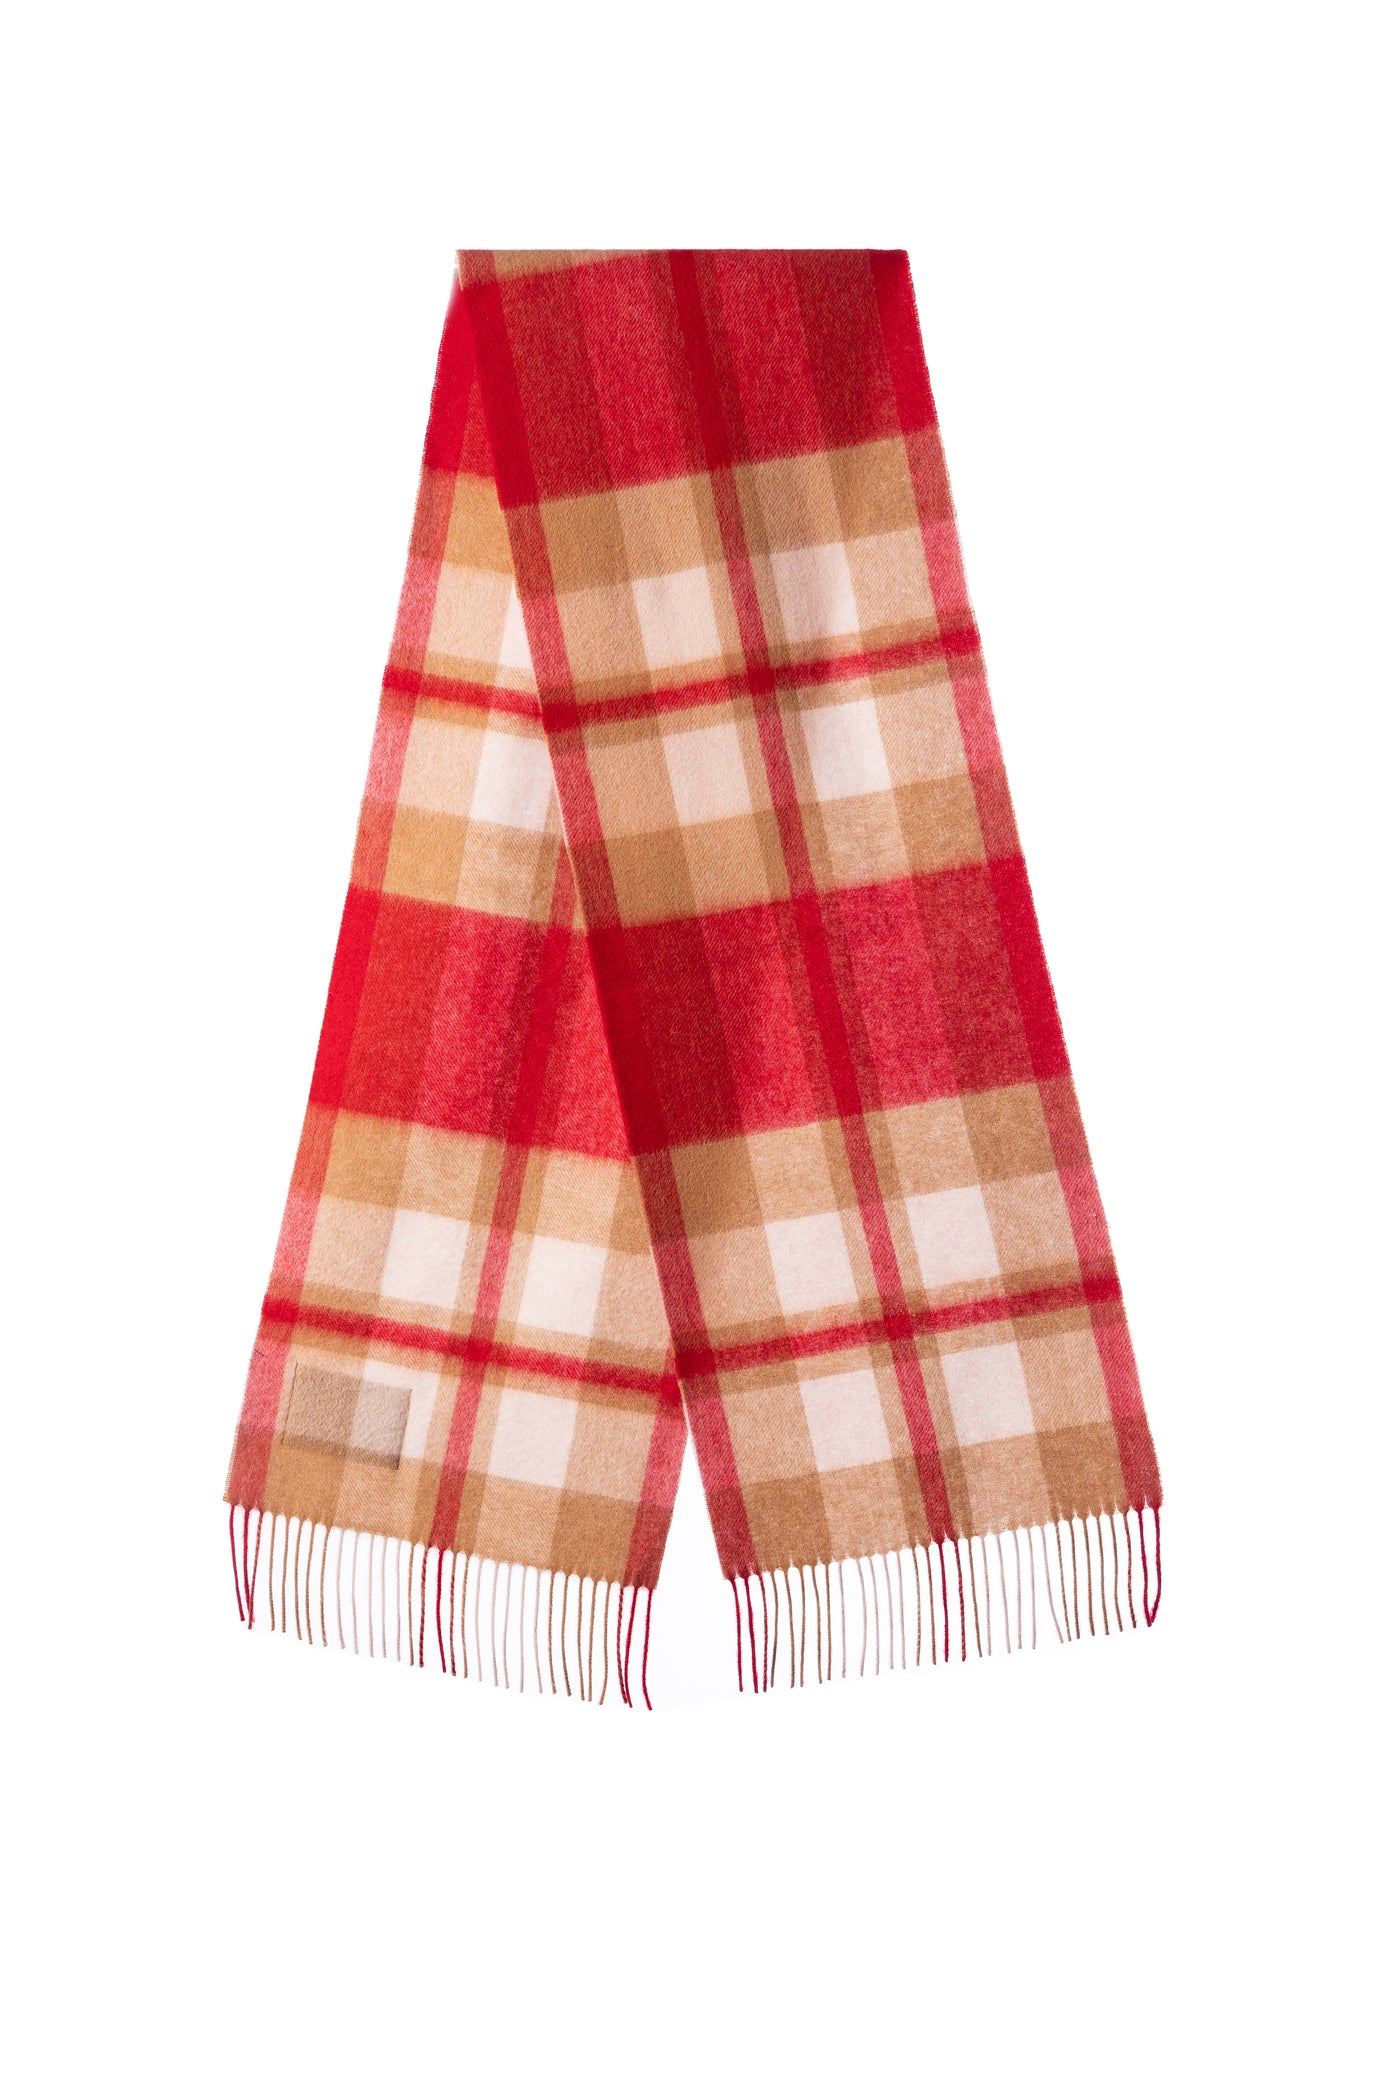 Scarf Plain Red 100% Pure Lambswool